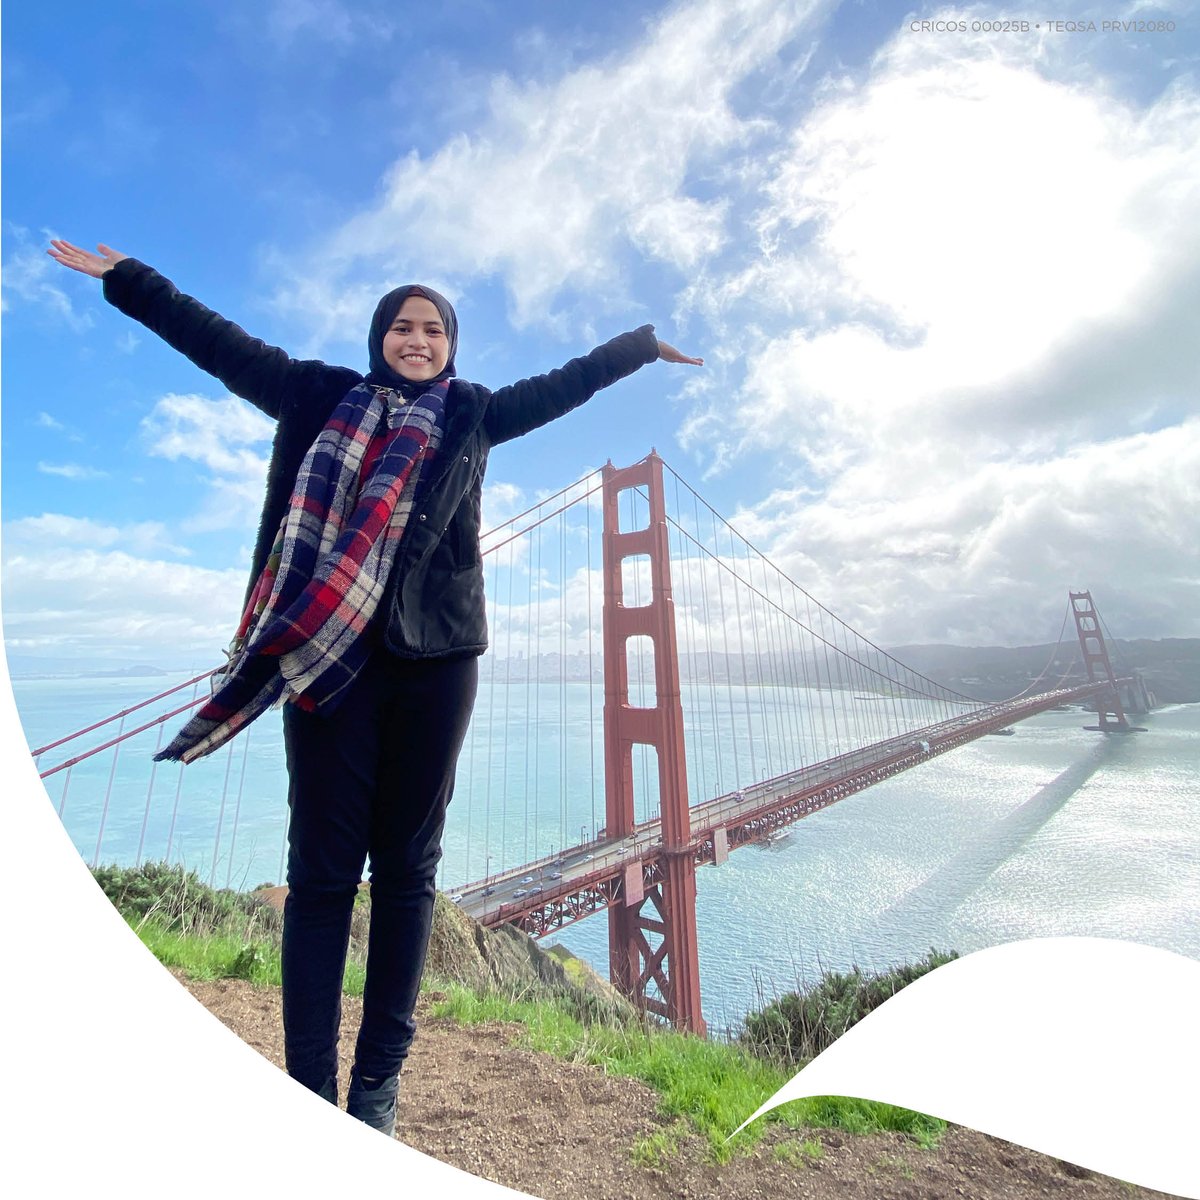 📢 Applications closing tomorrow! During the #UQVentures Startup AdVentures program, you’ll gain first-hand knowledge on growing an early-stage business and embed yourself in a San Fran #startup ecosystem. 📅 Applications close 14 September 👉 Apply ow.ly/kpSv50PKTzE